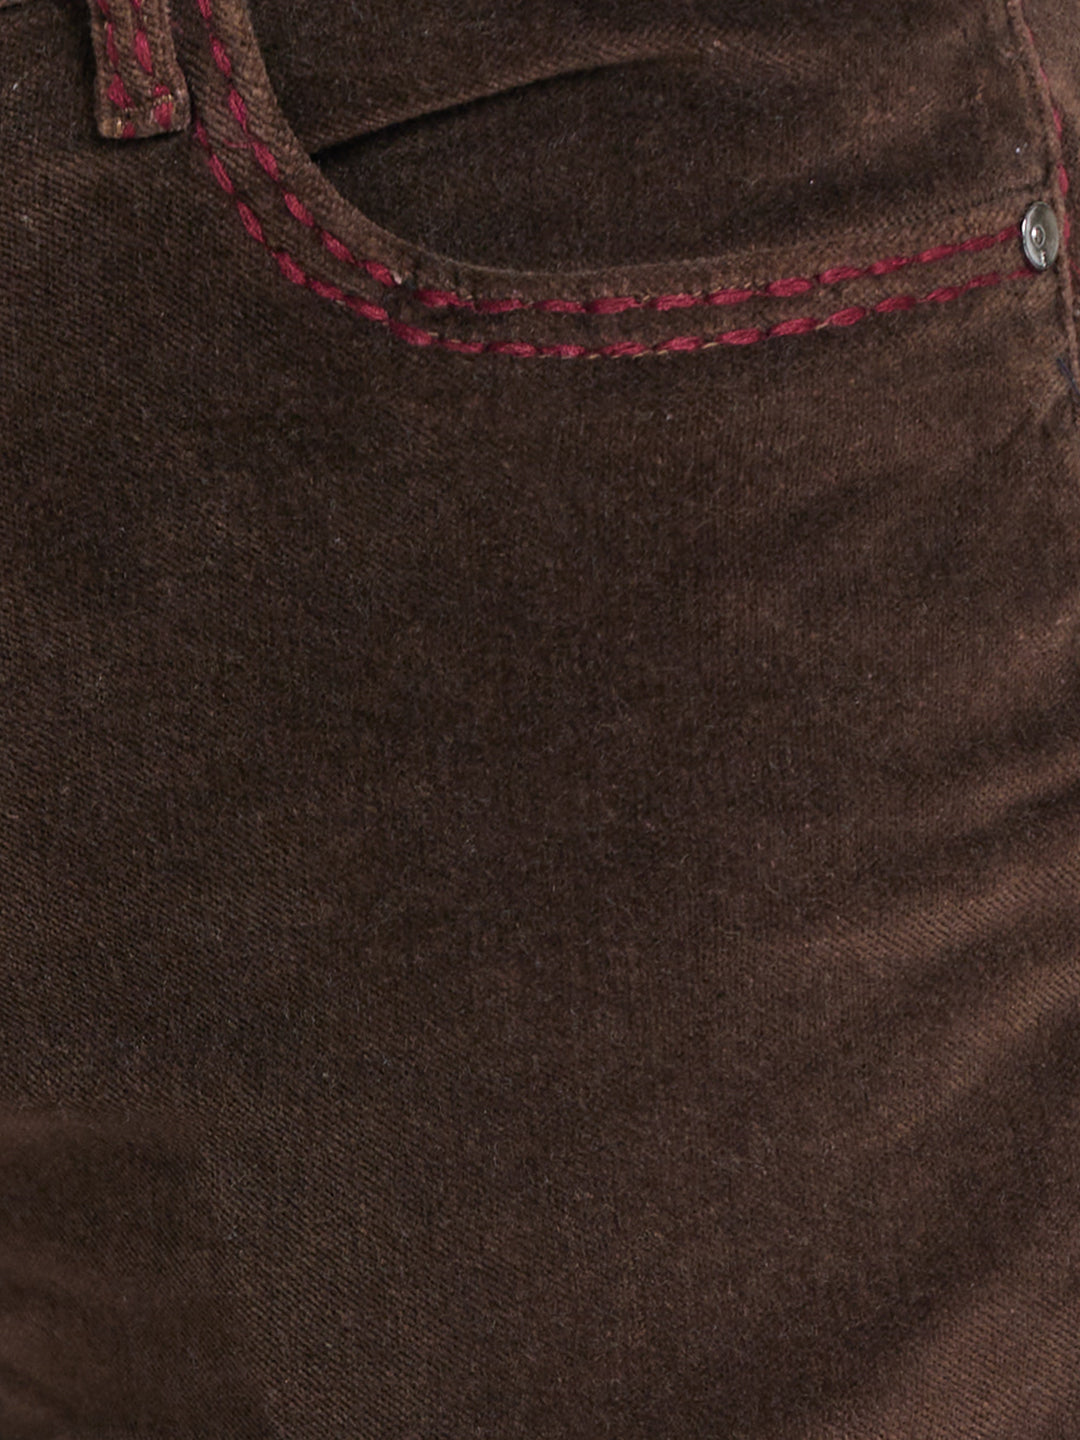 Brown Bootcut Corduroy With Maroon Saddle Stitch And Bottom Zipper